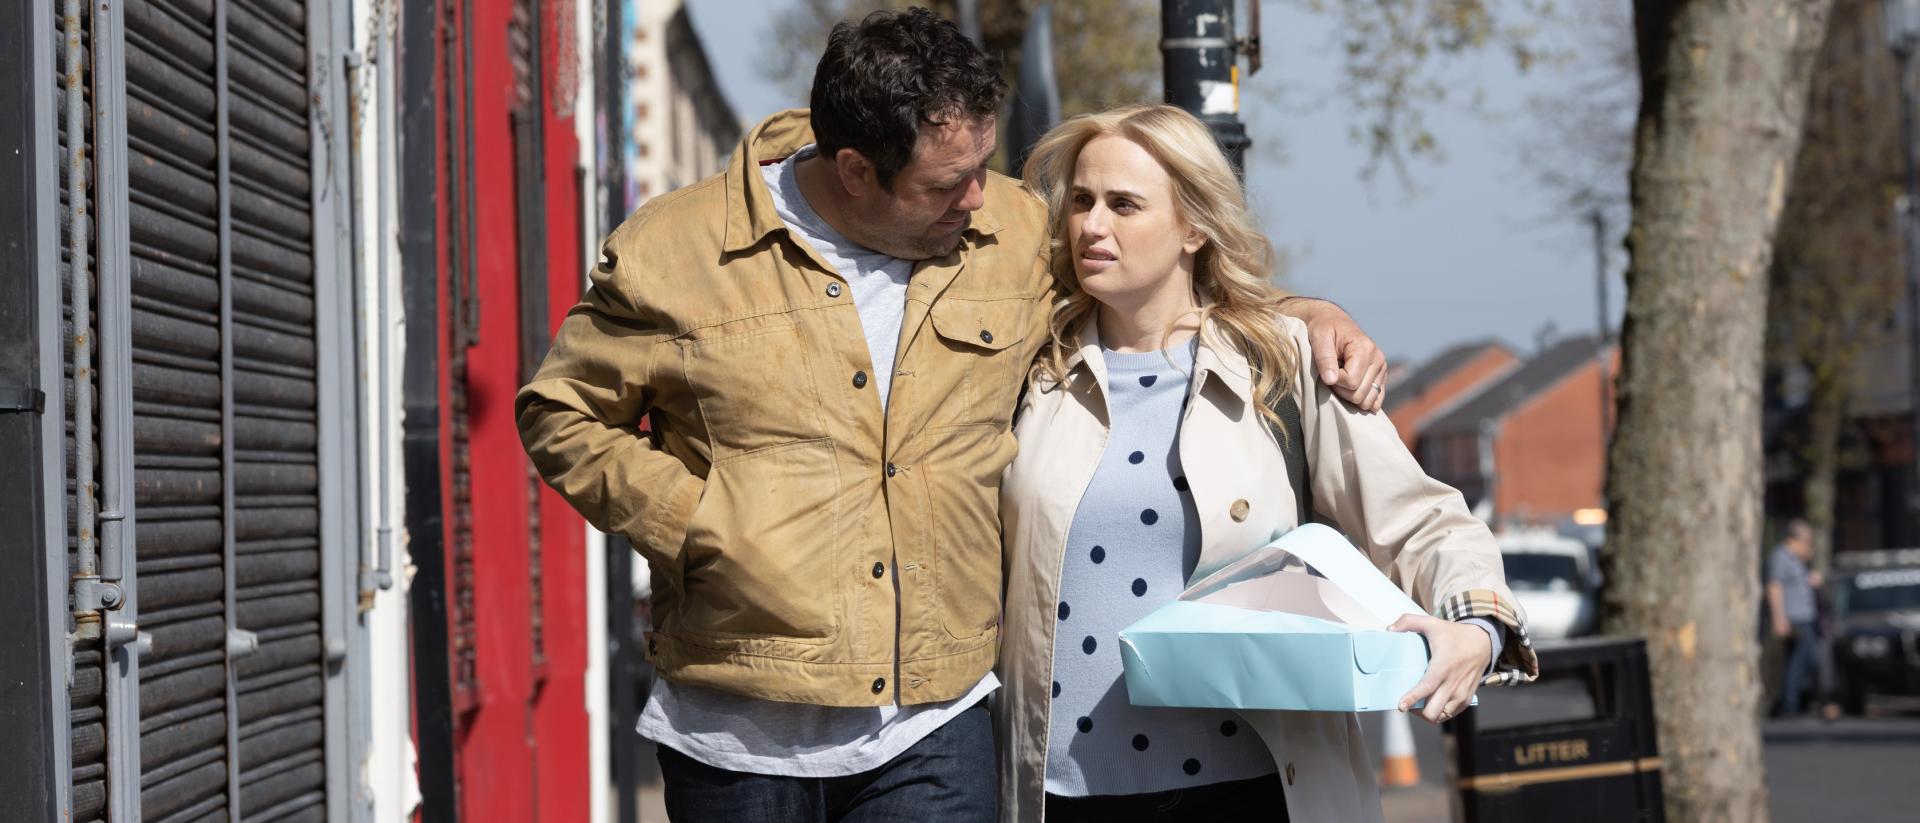 still from the almond and the seahorse featuring celyn jones and rebel wilson walking down a street during the day. Celyn has his arm around Rebel's shoulders and she is carrying a box